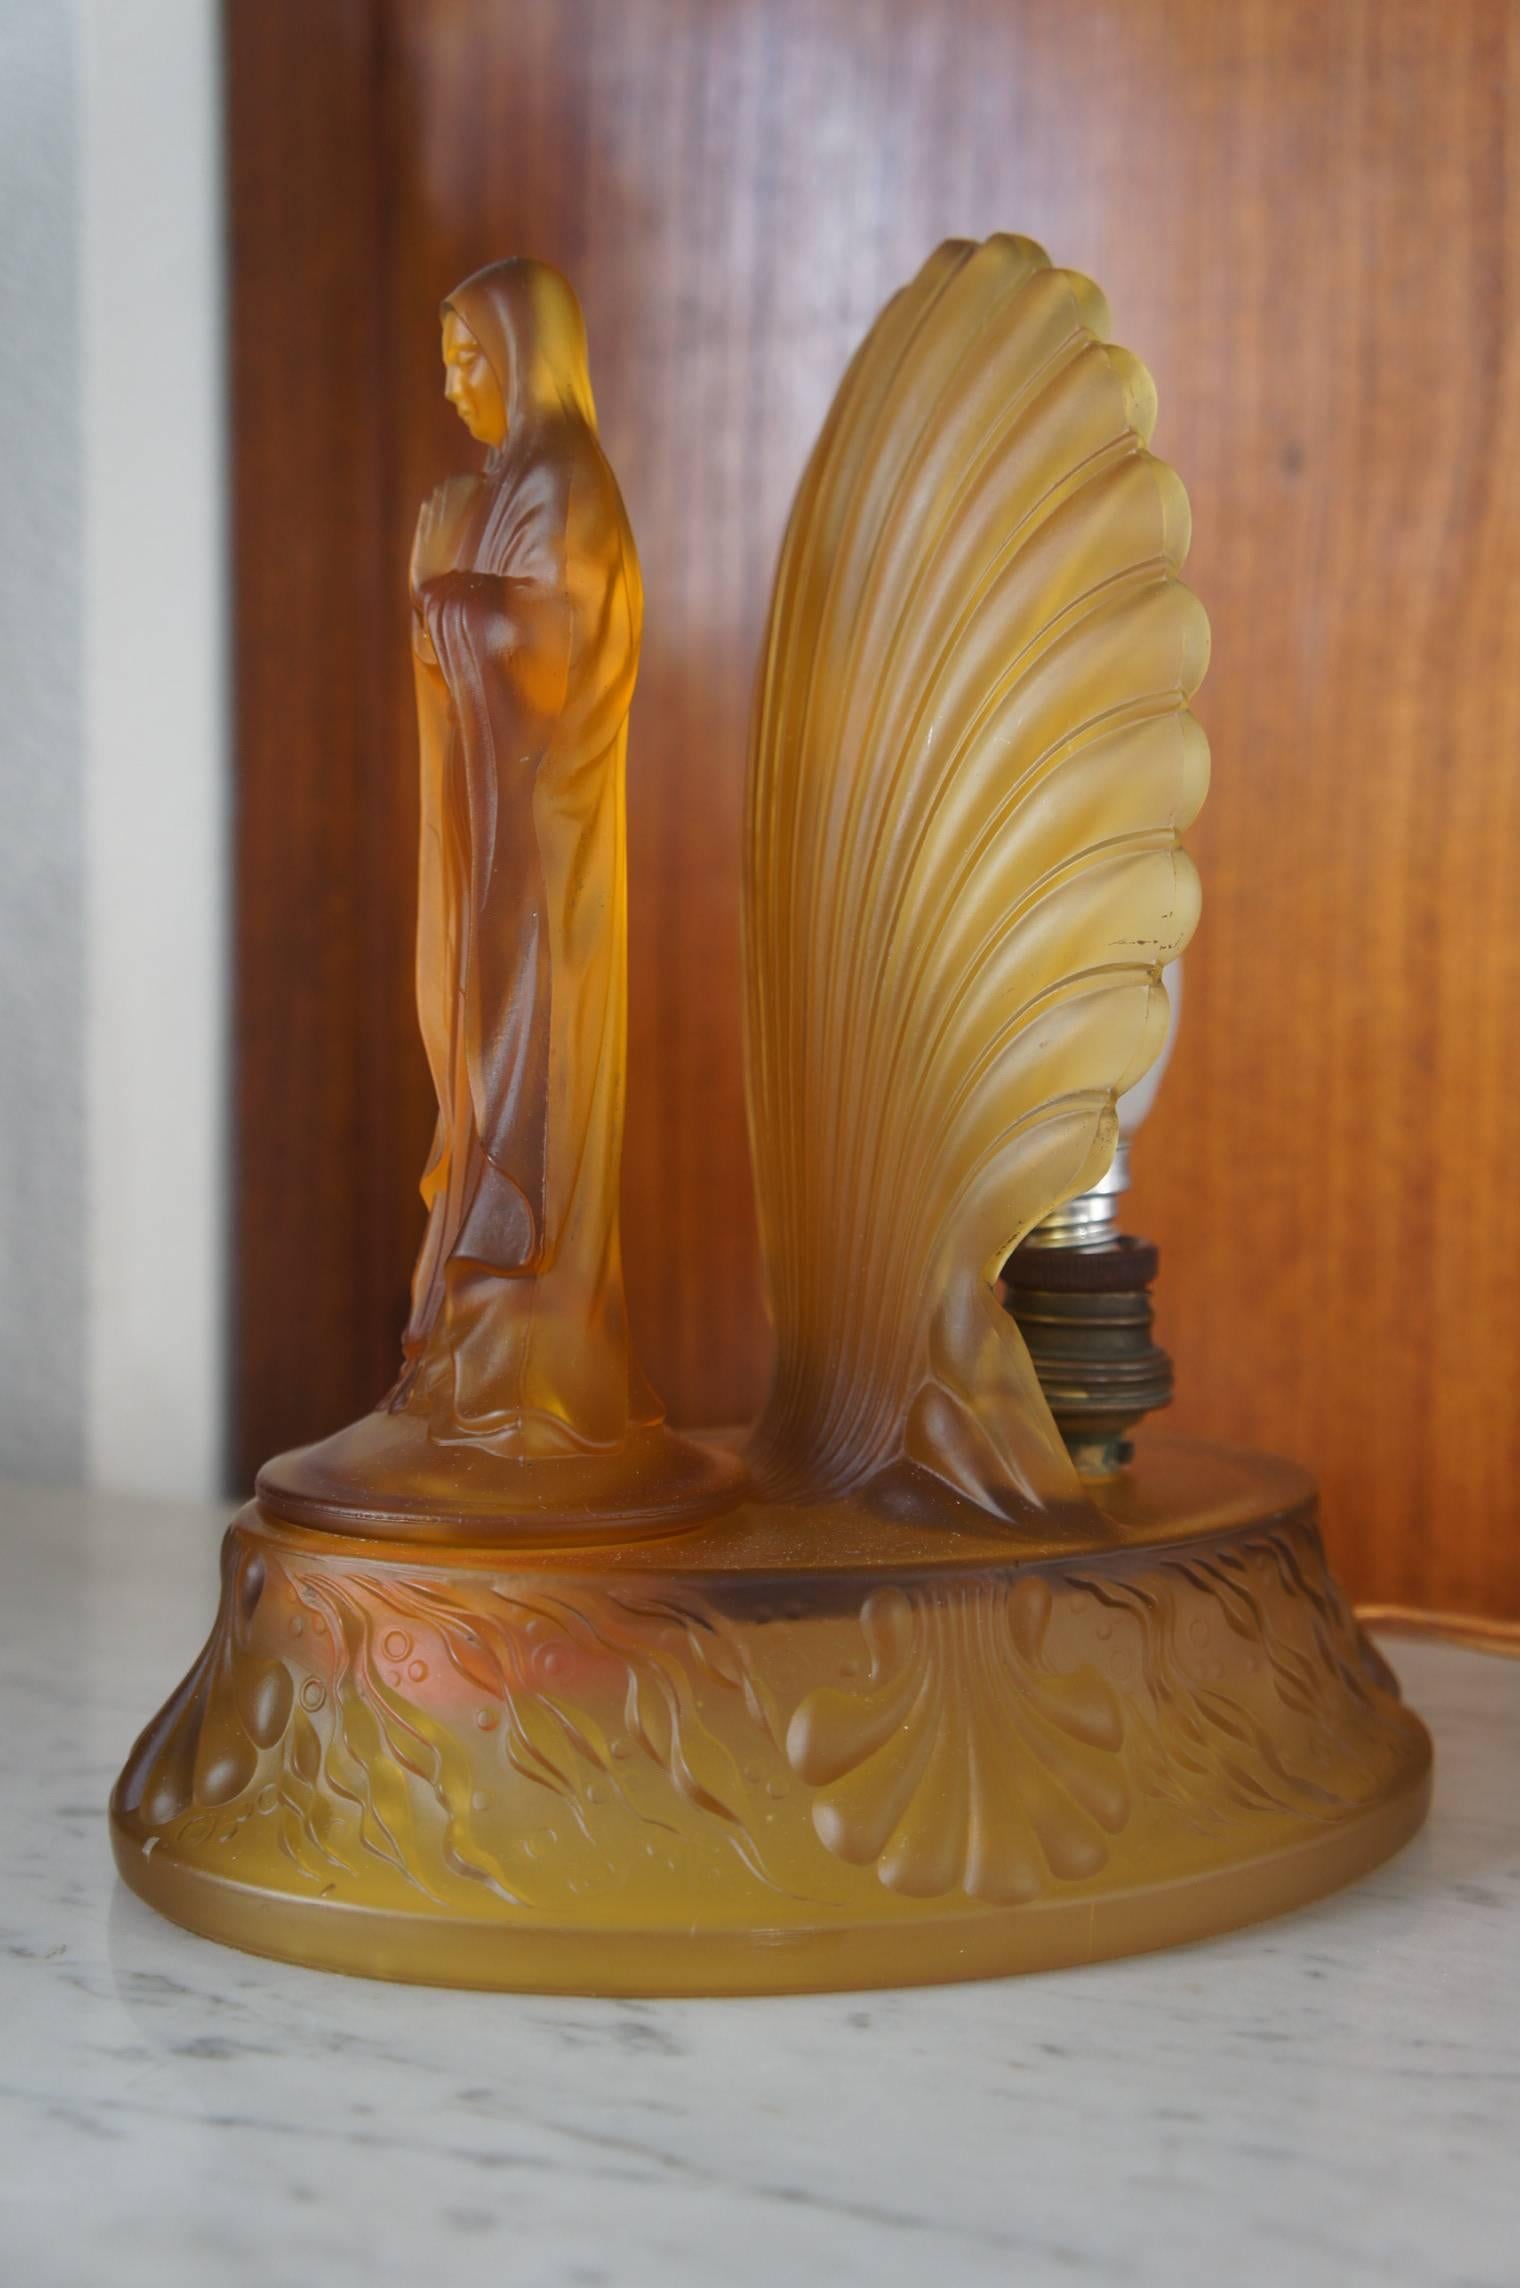 Original and rare Art Deco lamp.

This small but magnificent table lamp is an absolute joy to watch......even if you are not religious or spiritual. Wherever you may place this beauty, it will change the look and feel of the area that it is in.